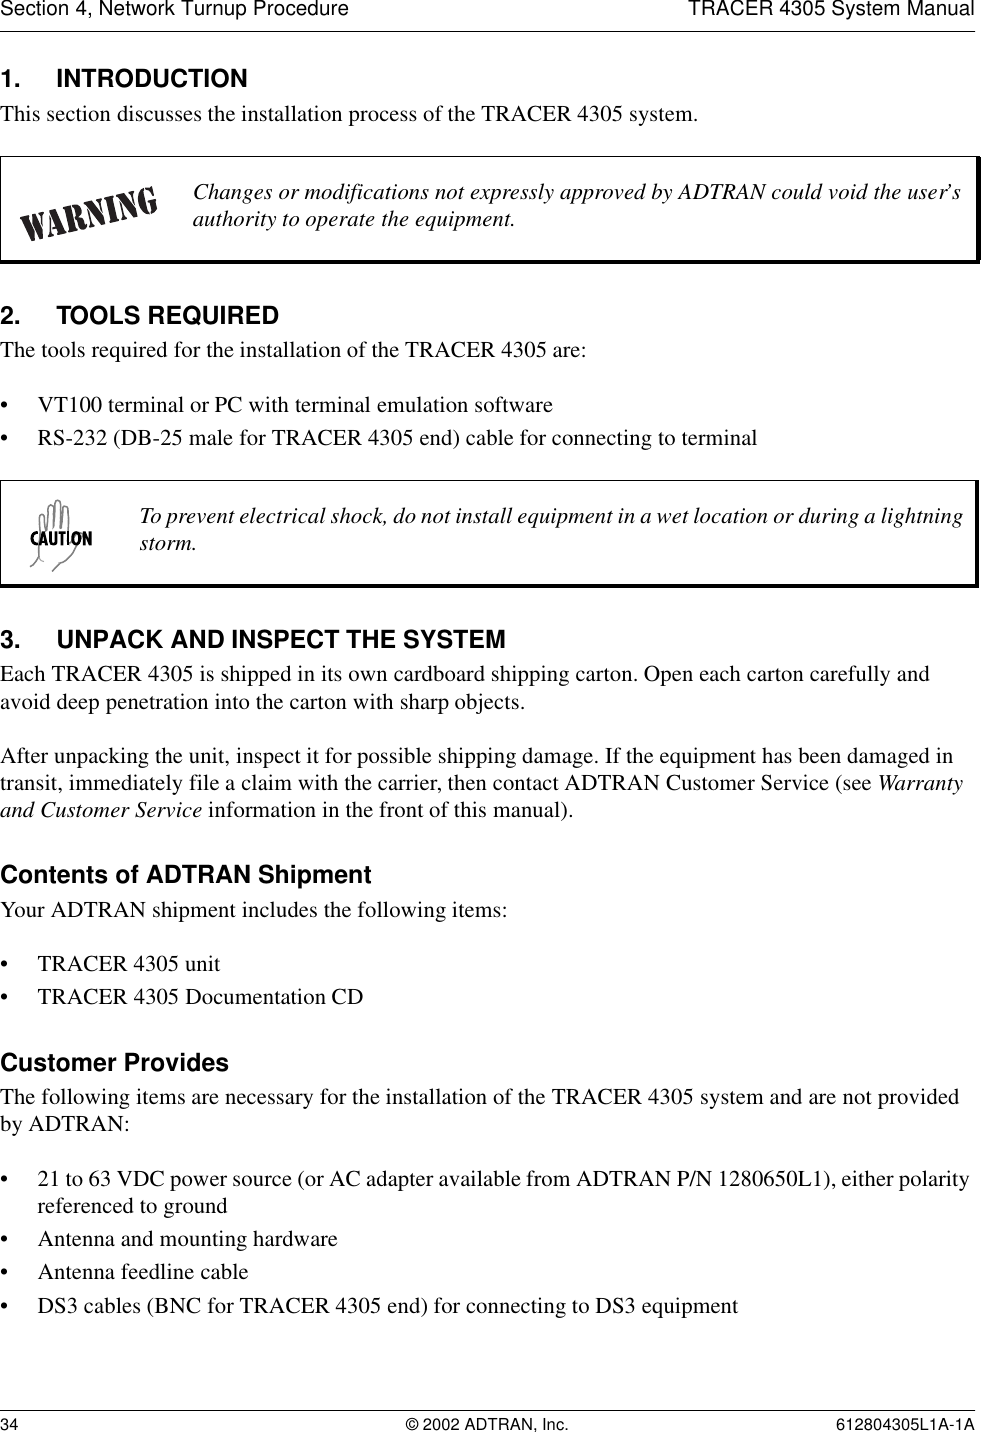 Section 4, Network Turnup Procedure TRACER 4305 System Manual34 © 2002 ADTRAN, Inc. 612804305L1A-1A1. INTRODUCTIONThis section discusses the installation process of the TRACER 4305 system.2. TOOLS REQUIREDThe tools required for the installation of the TRACER 4305 are:• VT100 terminal or PC with terminal emulation software• RS-232 (DB-25 male for TRACER 4305 end) cable for connecting to terminal3. UNPACK AND INSPECT THE SYSTEMEach TRACER 4305 is shipped in its own cardboard shipping carton. Open each carton carefully and avoid deep penetration into the carton with sharp objects. After unpacking the unit, inspect it for possible shipping damage. If the equipment has been damaged in transit, immediately file a claim with the carrier, then contact ADTRAN Customer Service (see Warranty and Customer Service information in the front of this manual).Contents of ADTRAN ShipmentYour ADTRAN shipment includes the following items:• TRACER 4305 unit• TRACER 4305 Documentation CDCustomer ProvidesThe following items are necessary for the installation of the TRACER 4305 system and are not provided by ADTRAN:• 21 to 63 VDC power source (or AC adapter available from ADTRAN P/N 1280650L1), either polarity referenced to ground• Antenna and mounting hardware• Antenna feedline cable• DS3 cables (BNC for TRACER 4305 end) for connecting to DS3 equipmentChanges or modifications not expressly approved by ADTRAN could void the user’s authority to operate the equipment.To prevent electrical shock, do not install equipment in a wet location or during a lightning storm.